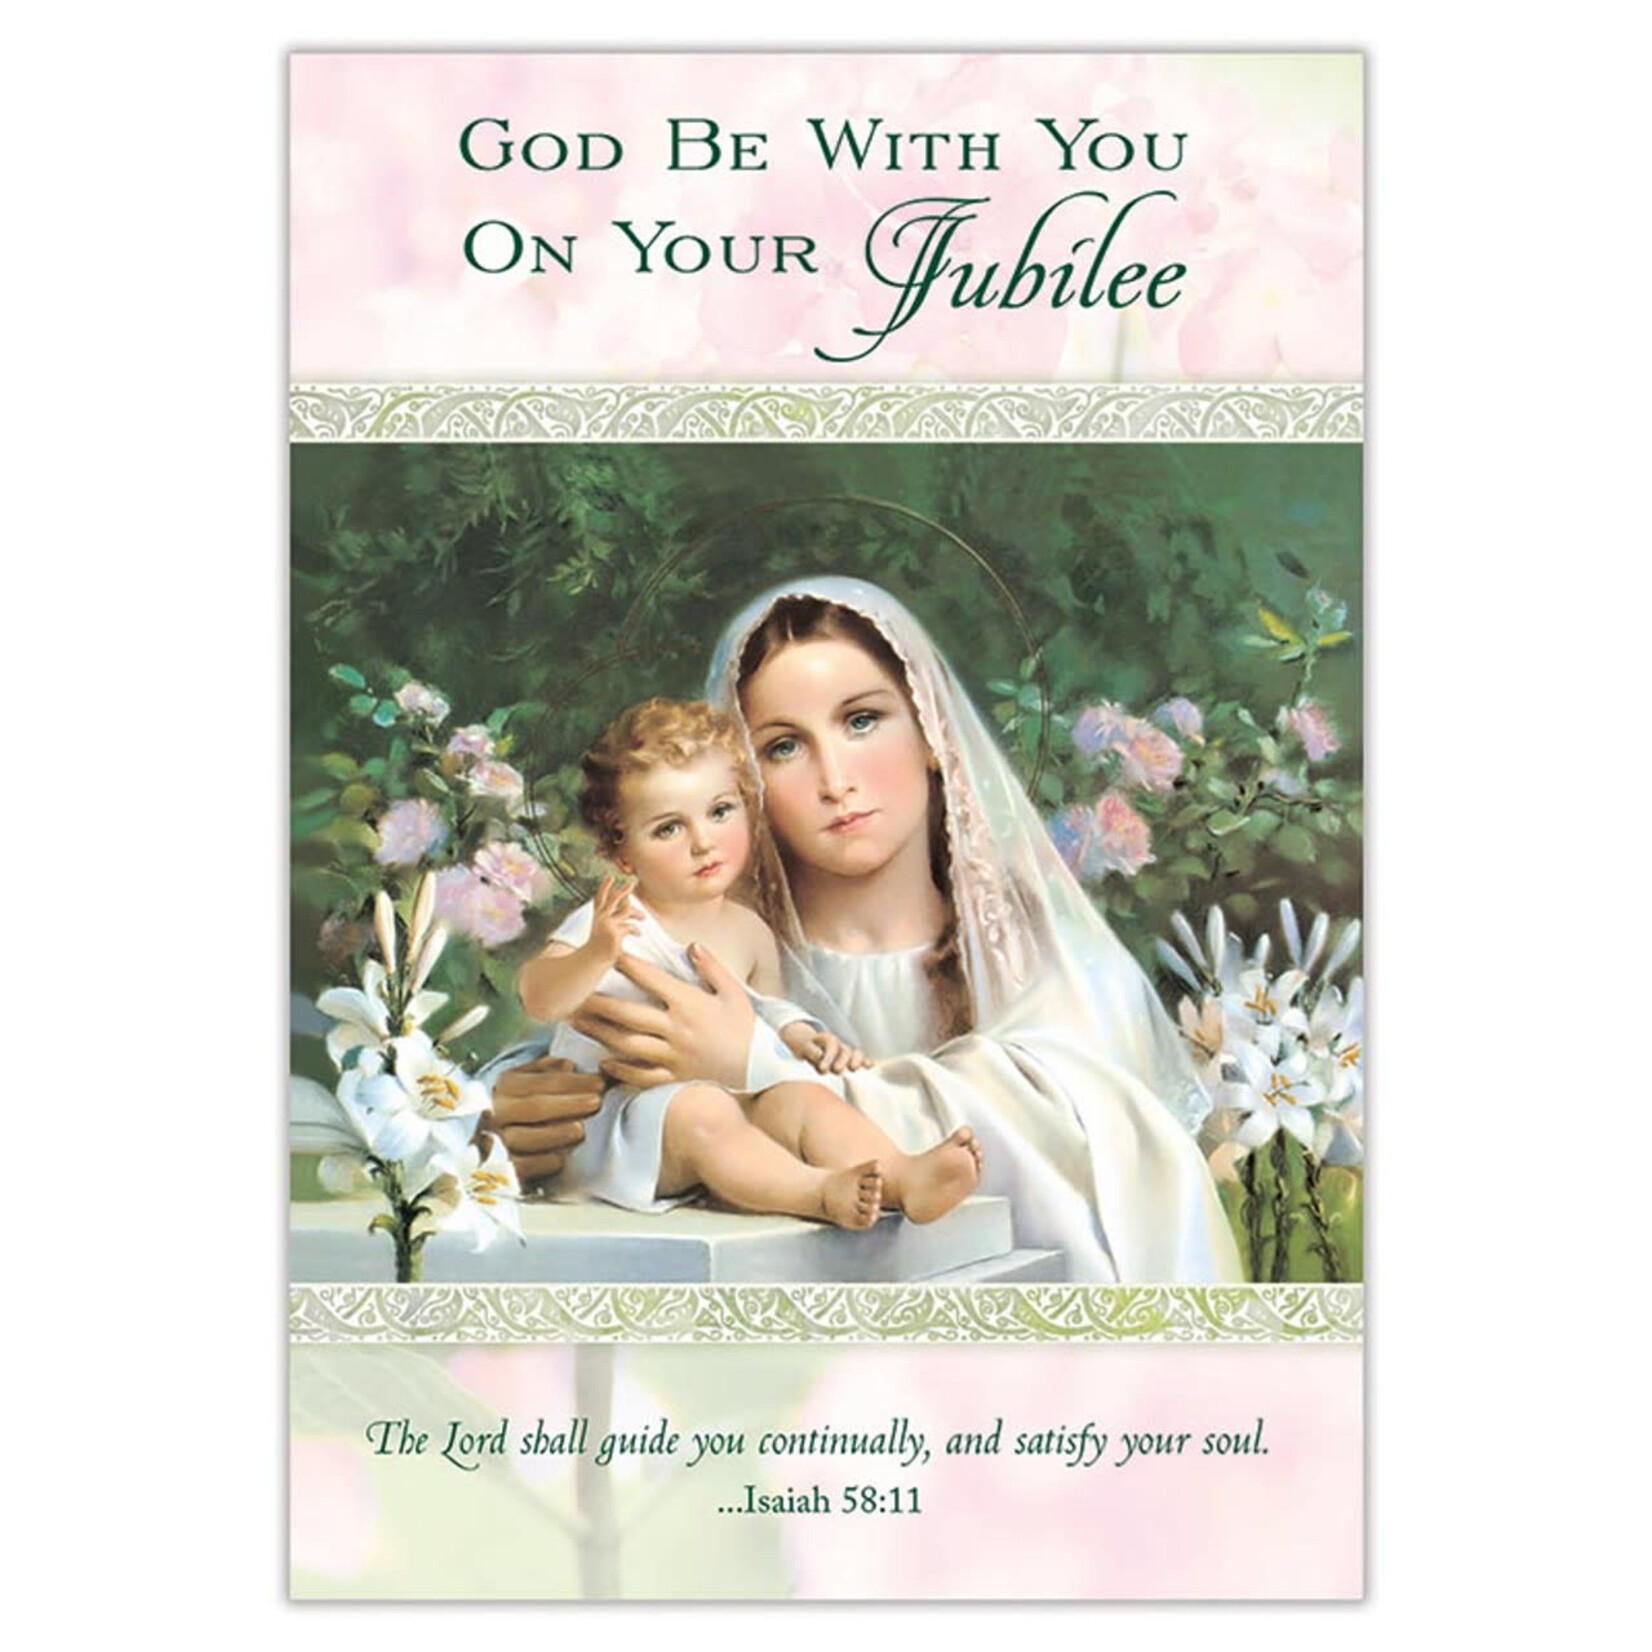 Greeting Card God With You on Your Jubilee